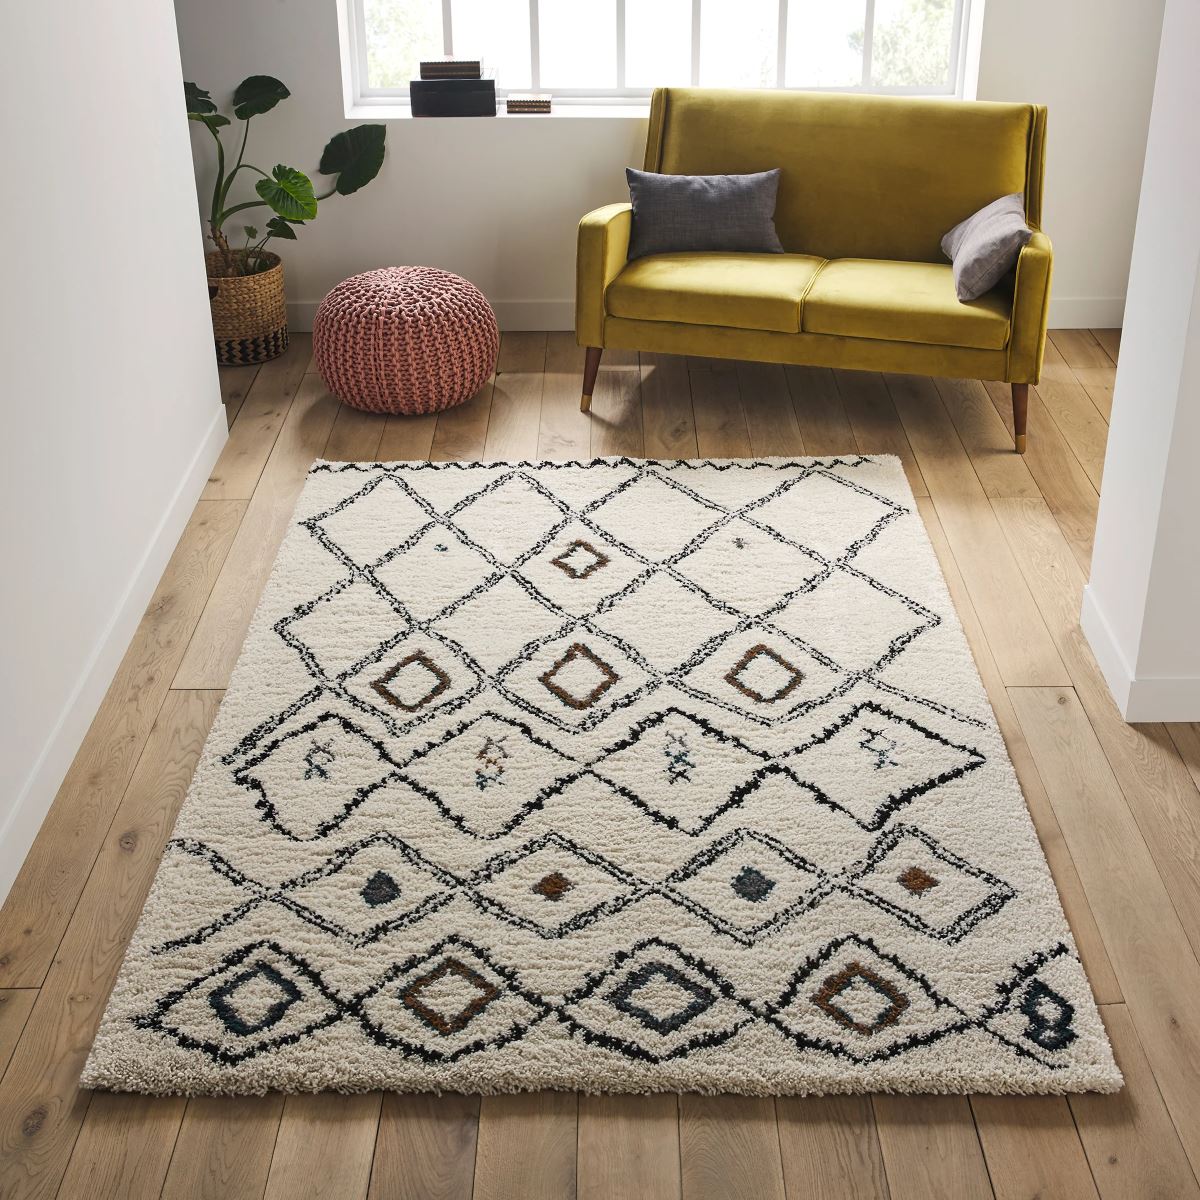 What Is A Berber Rug